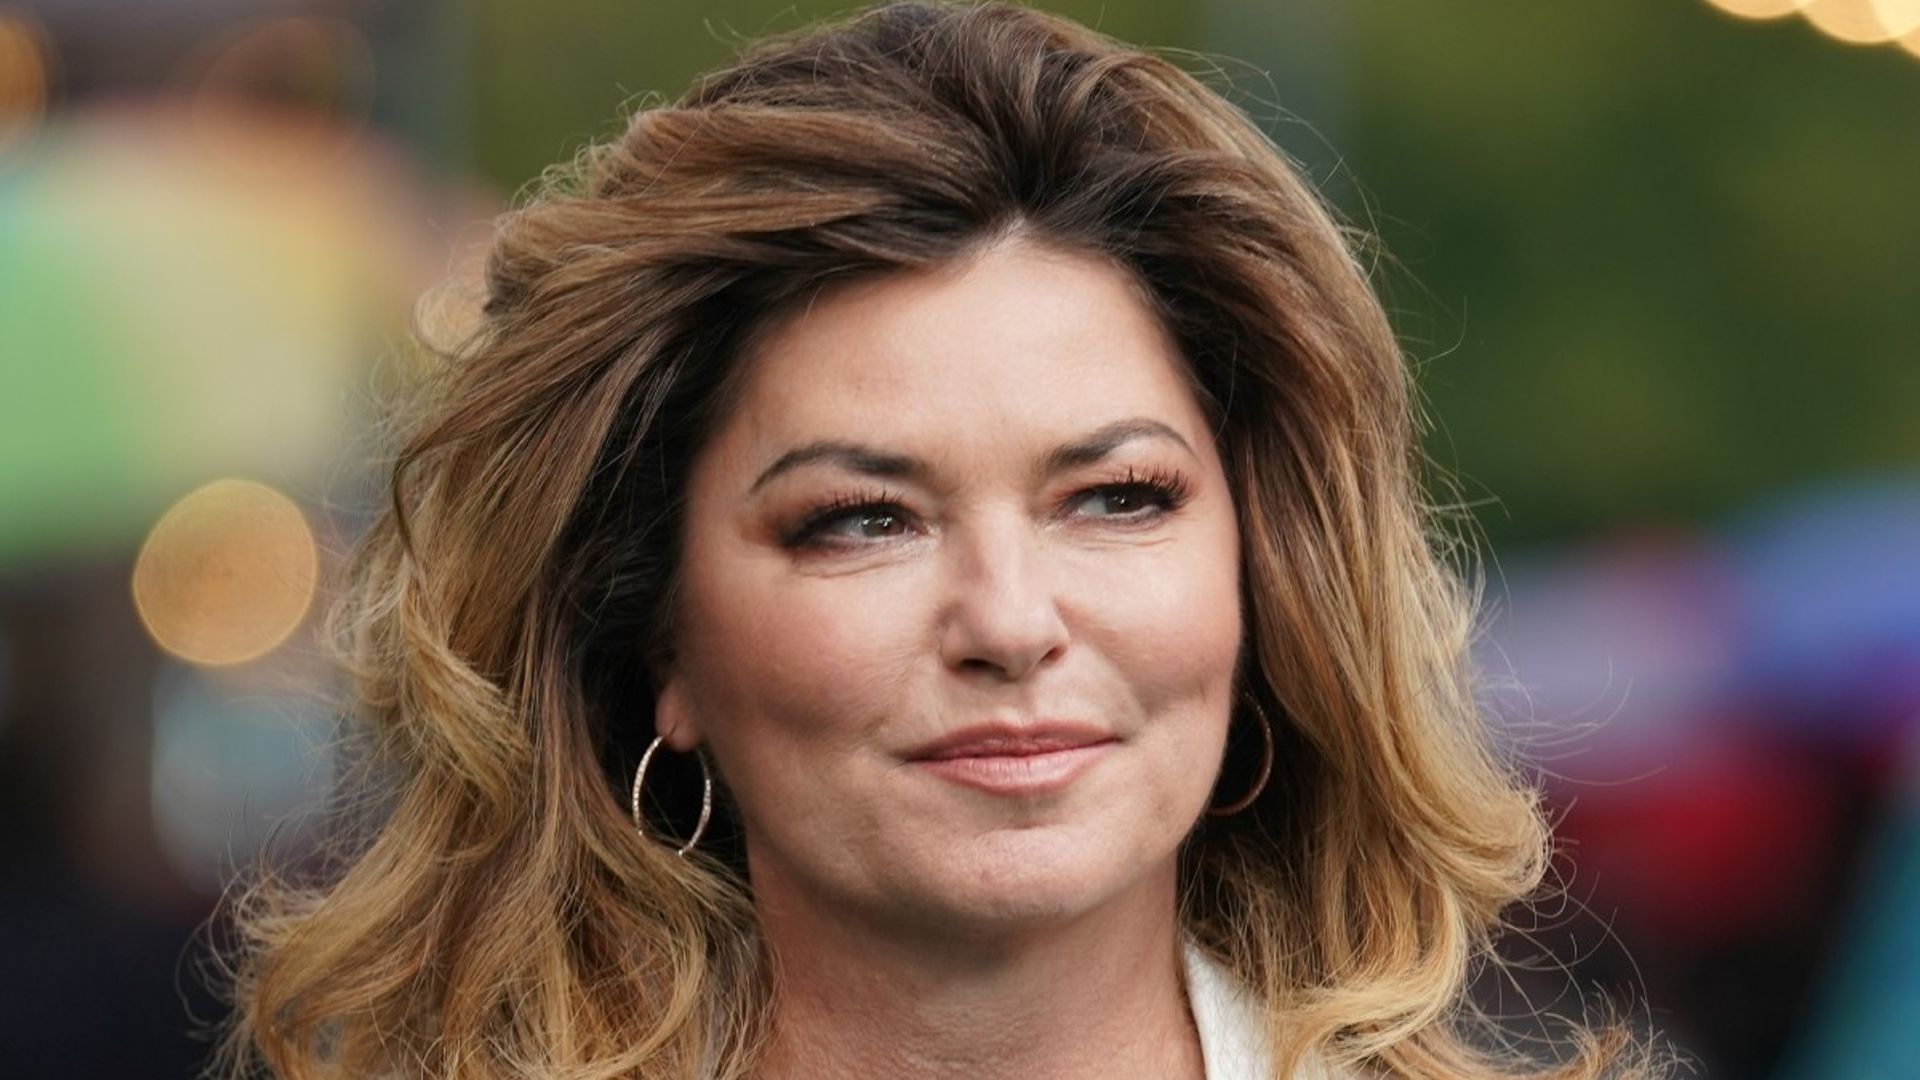 Shania Twain rocks iconic early 2000s look as she celebrates special anniversary with fans